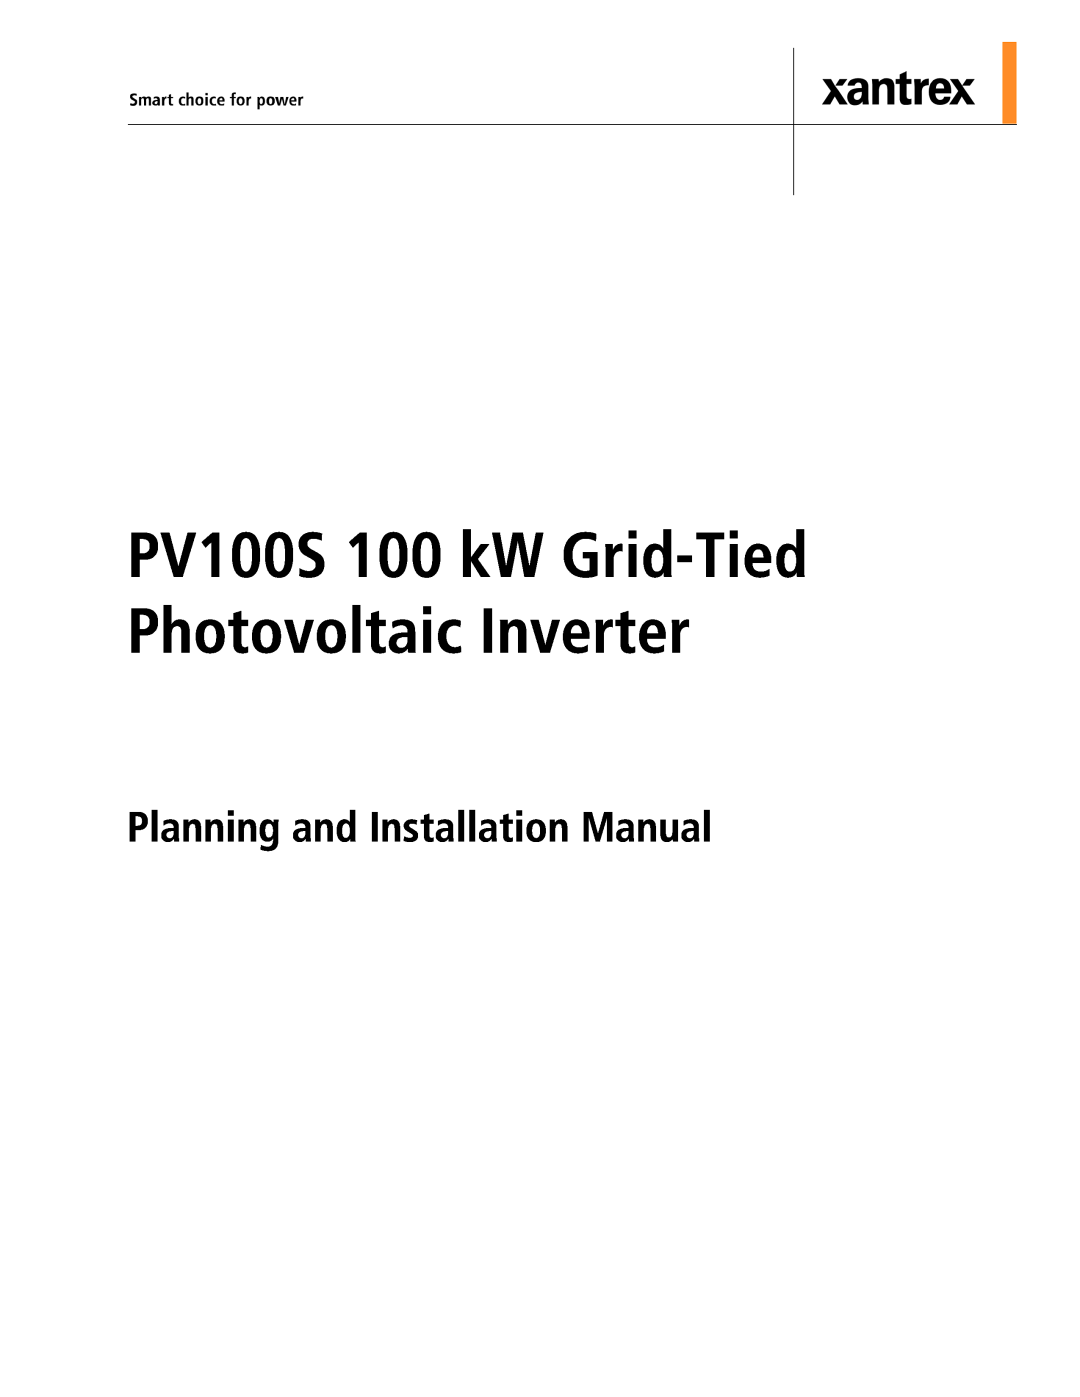 Xantrex Technology PV100S-480 Planning and Installation Manual, PV100S 100 kW Grid-Tied Photovoltaic Inverter 